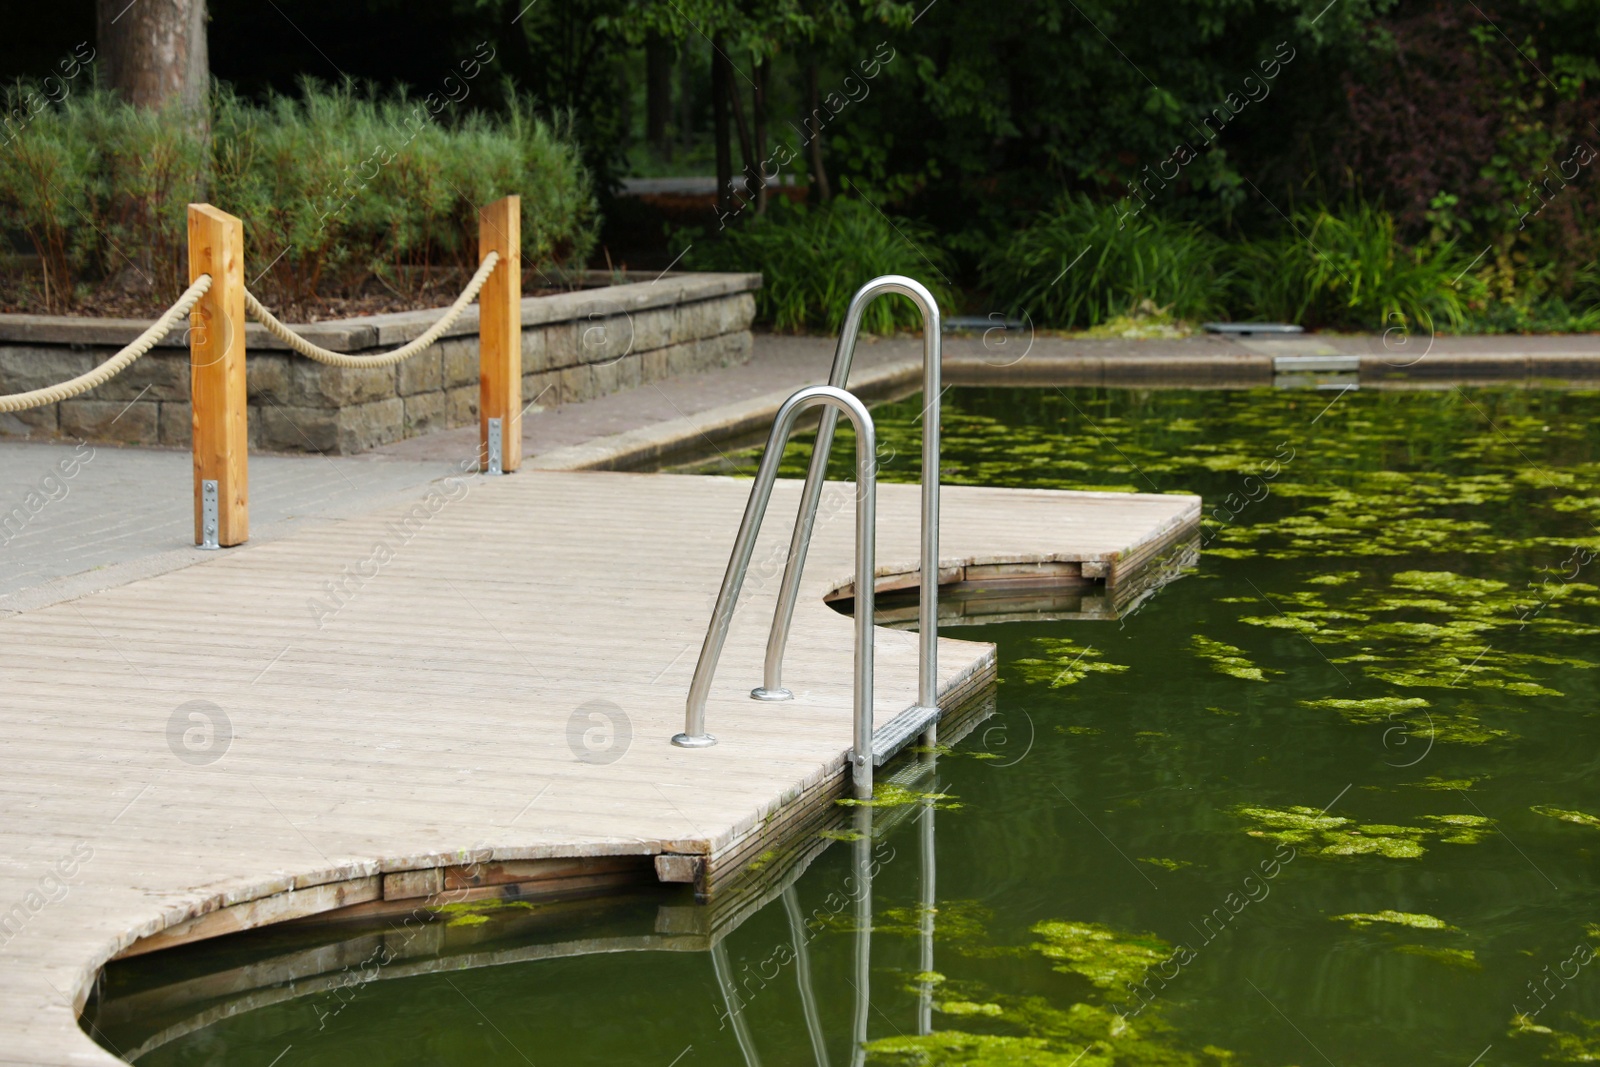 Photo of Wooden pier and pond with ladder in park